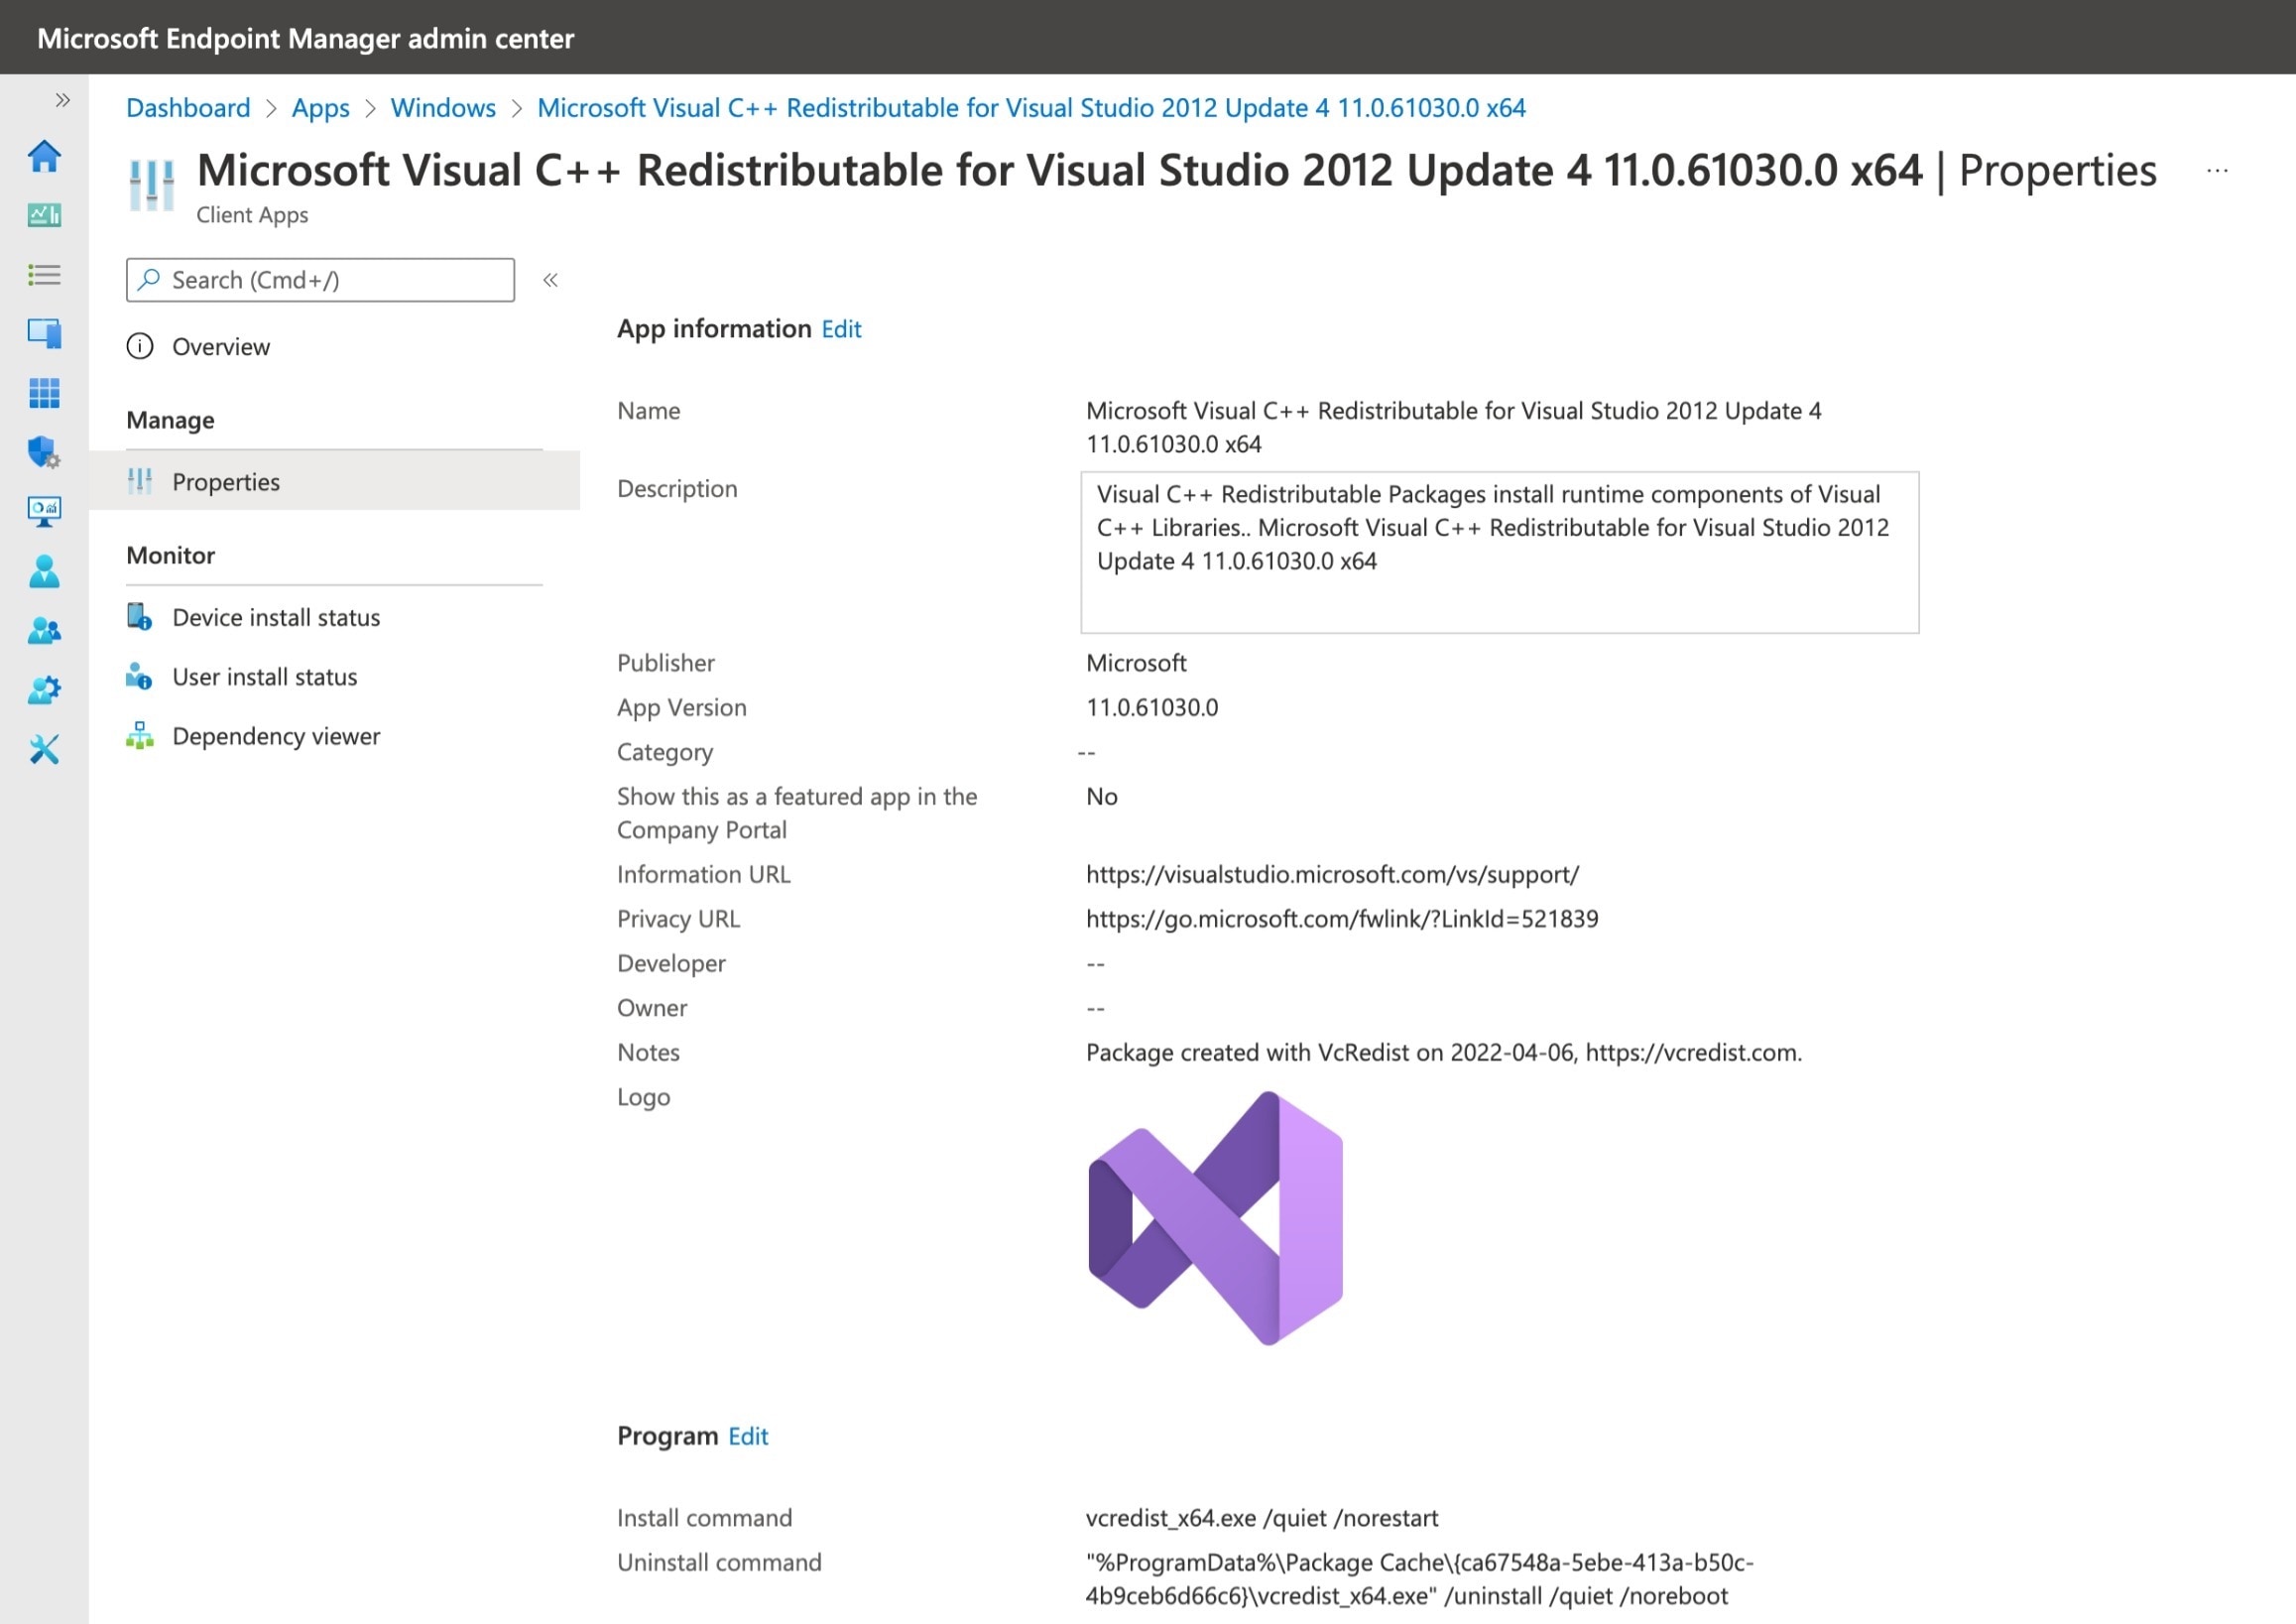 Microsoft Visual C++ Redistributables applications imported into Intune